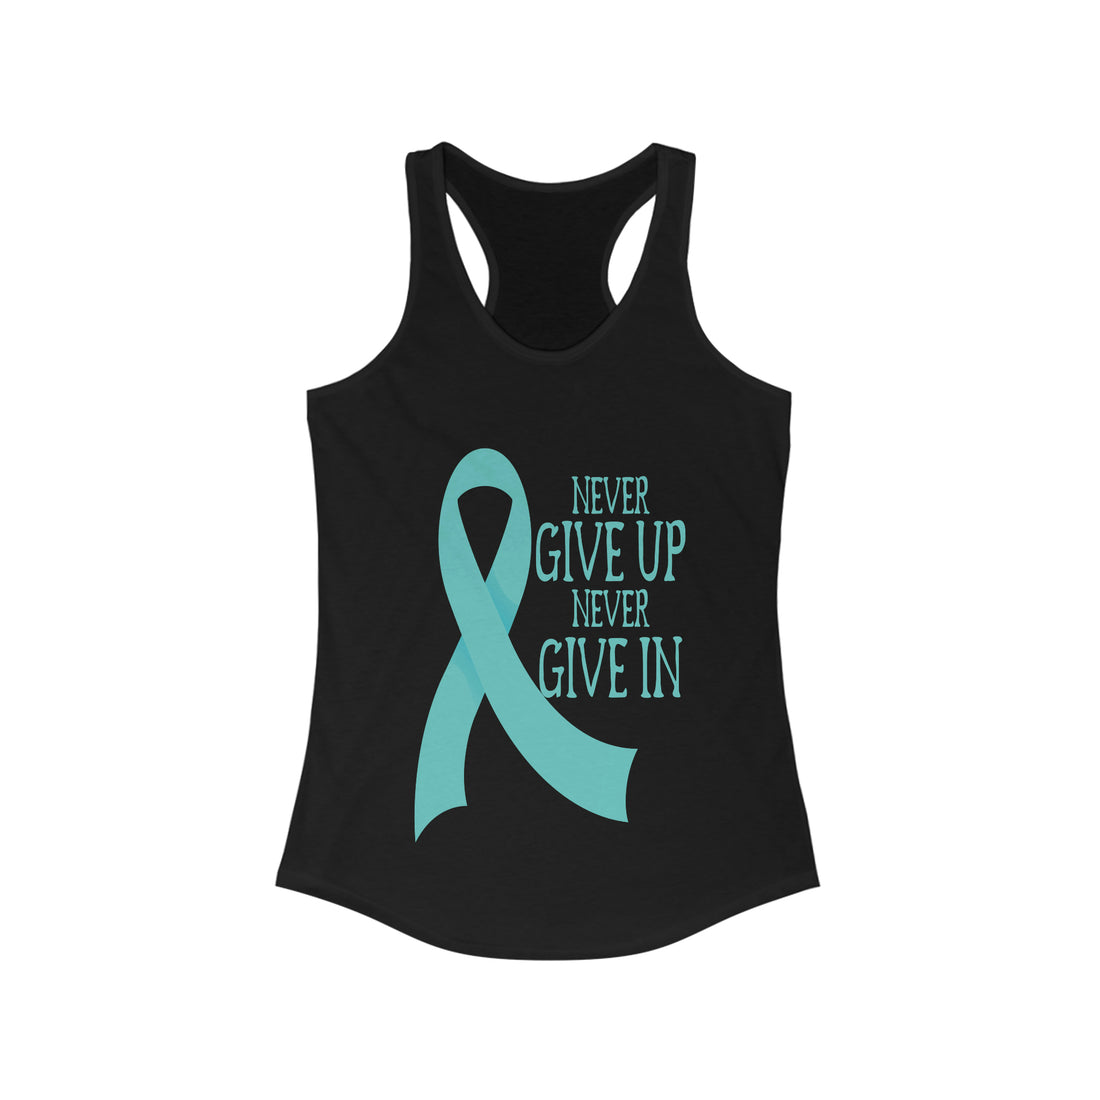 Never Give Up Never Give In - Racerback Tank Top